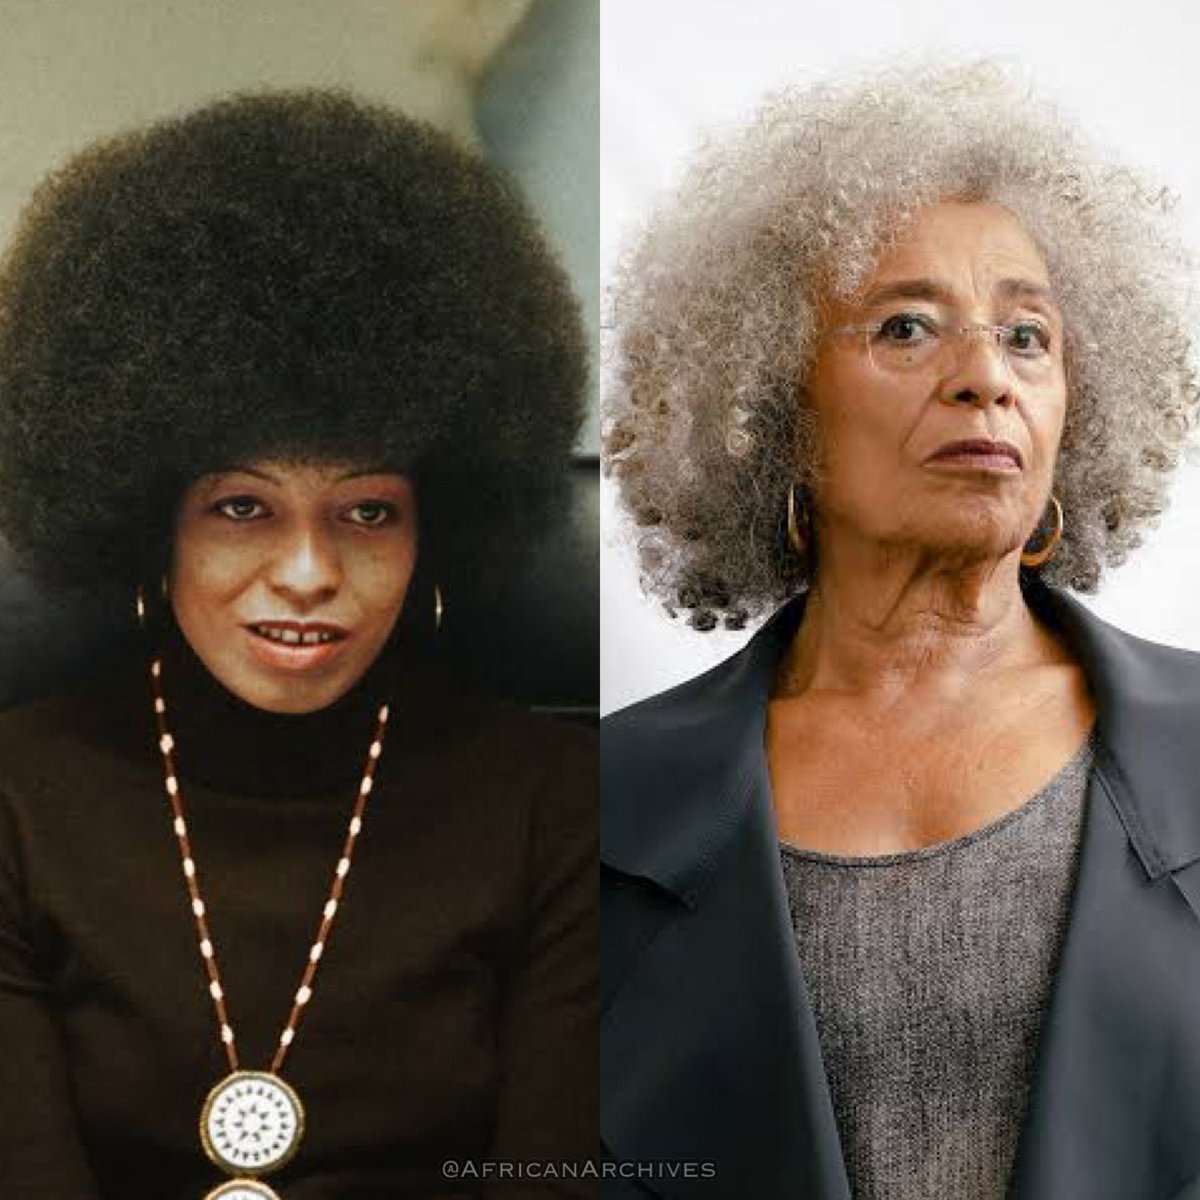 Happy 80th birthday to the legendary activist, marxist, scholar and author Angela Davis.

In 1970, she was placed on the FBI 10 Most Wanted List on false charges.